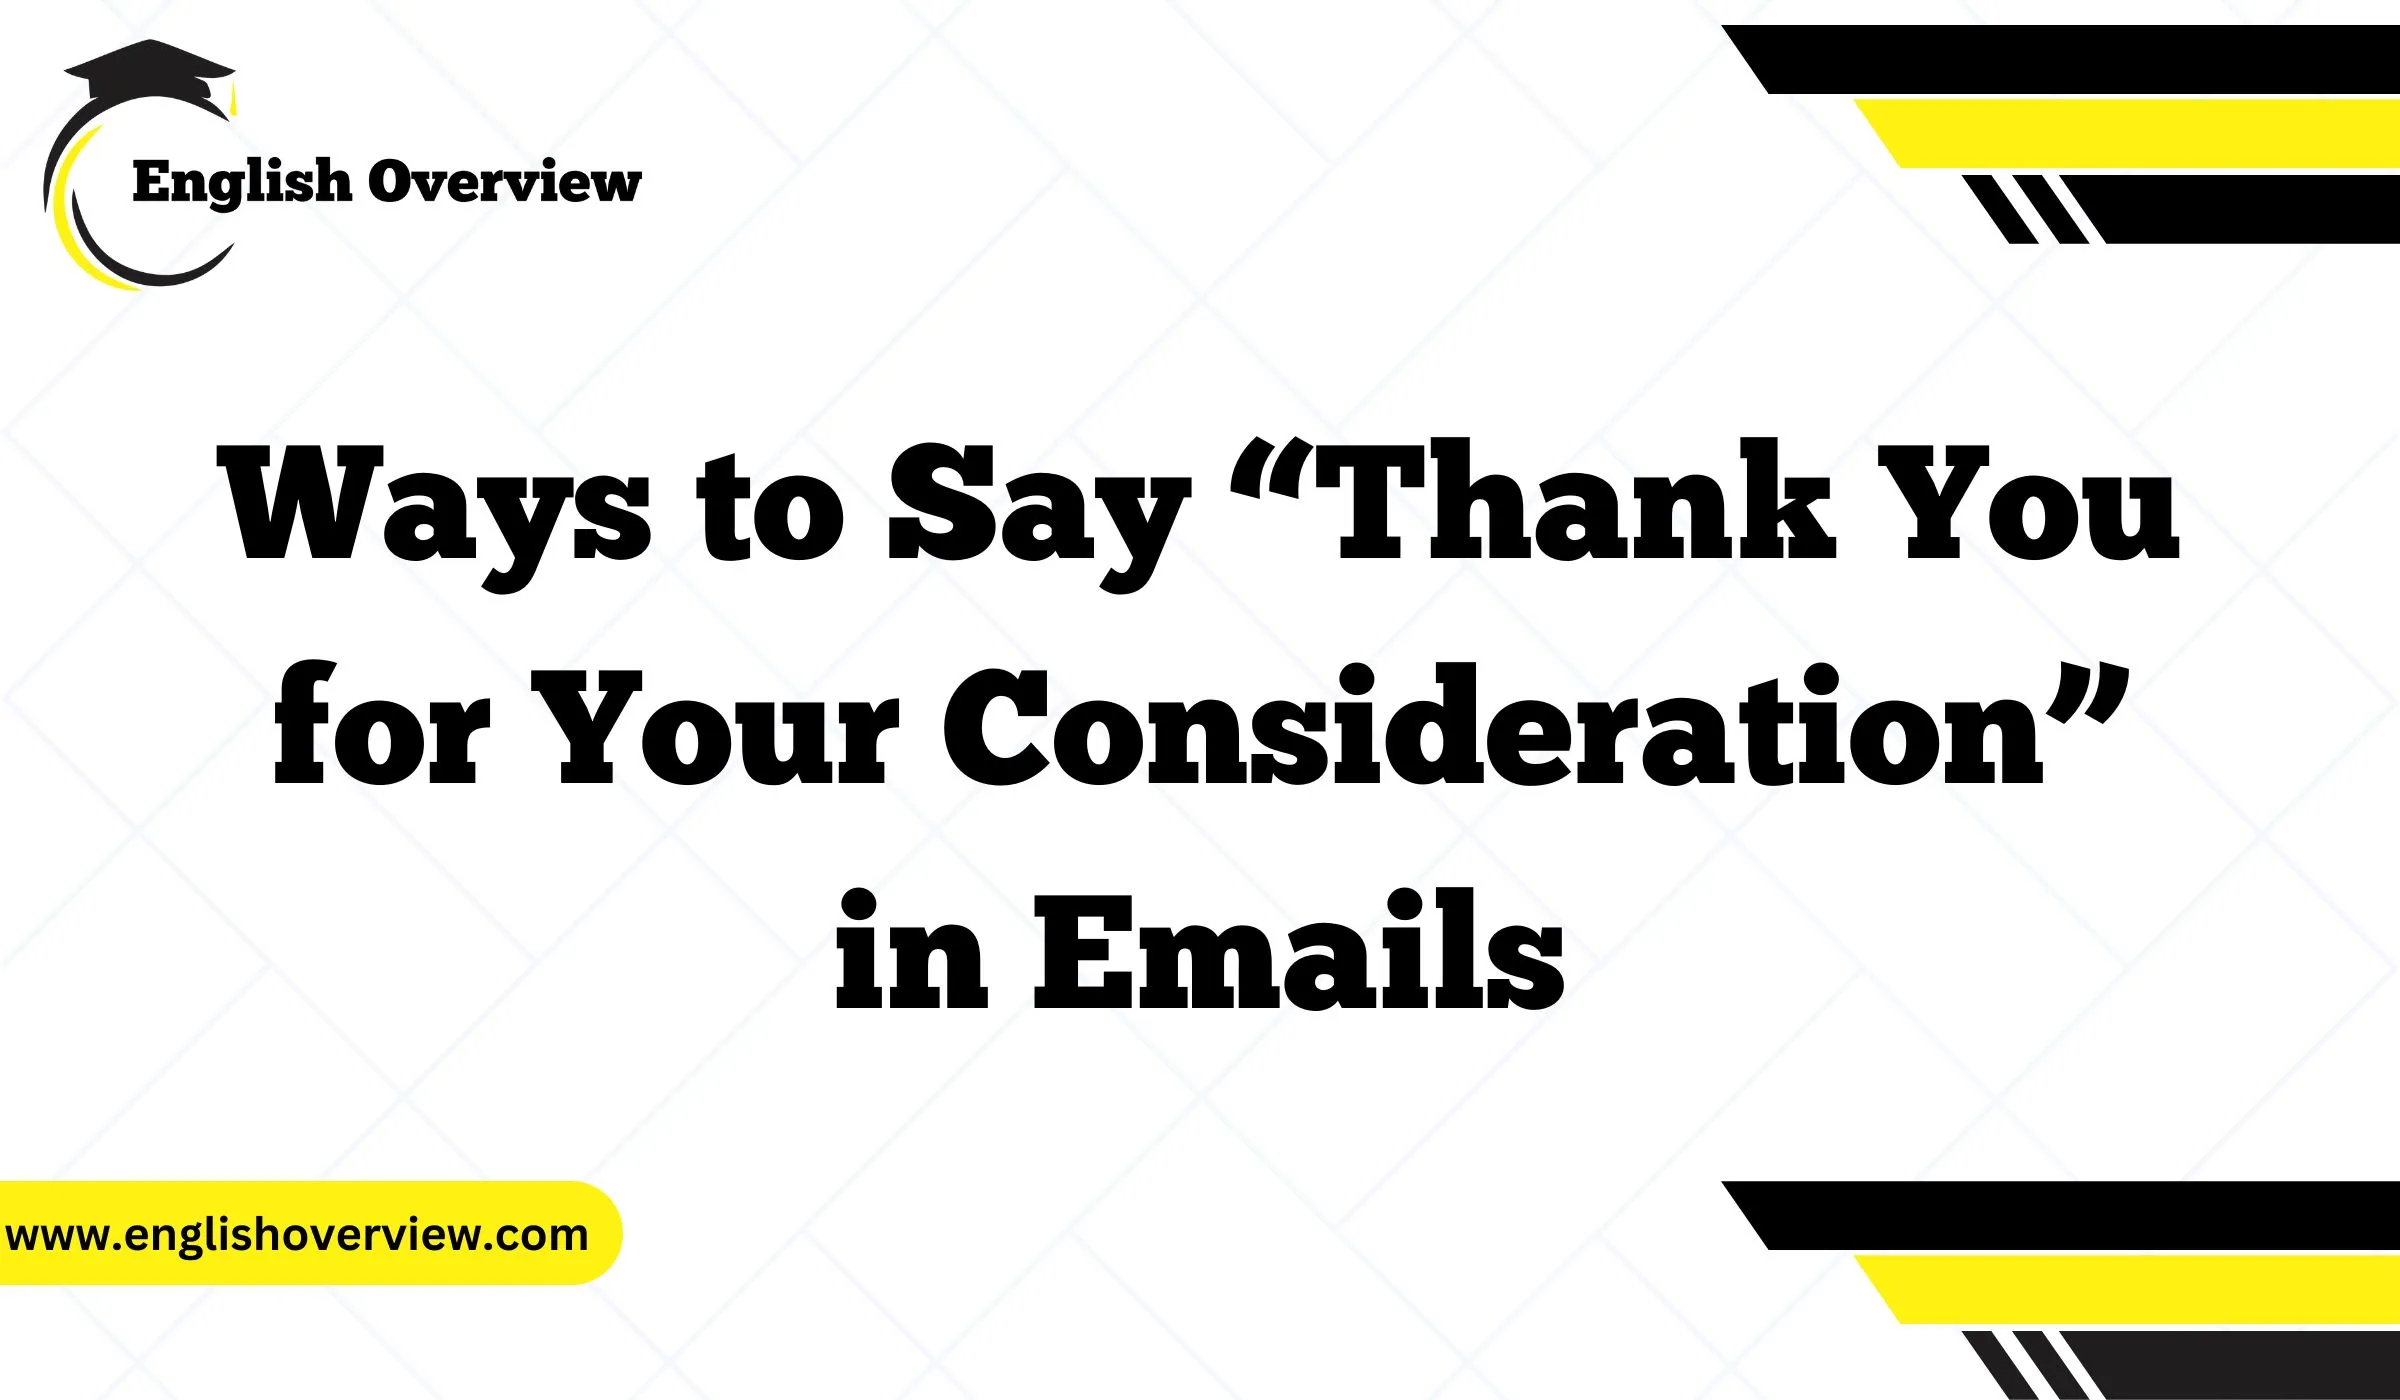 Ways to Say “Thank You for Your Consideration” in Emails